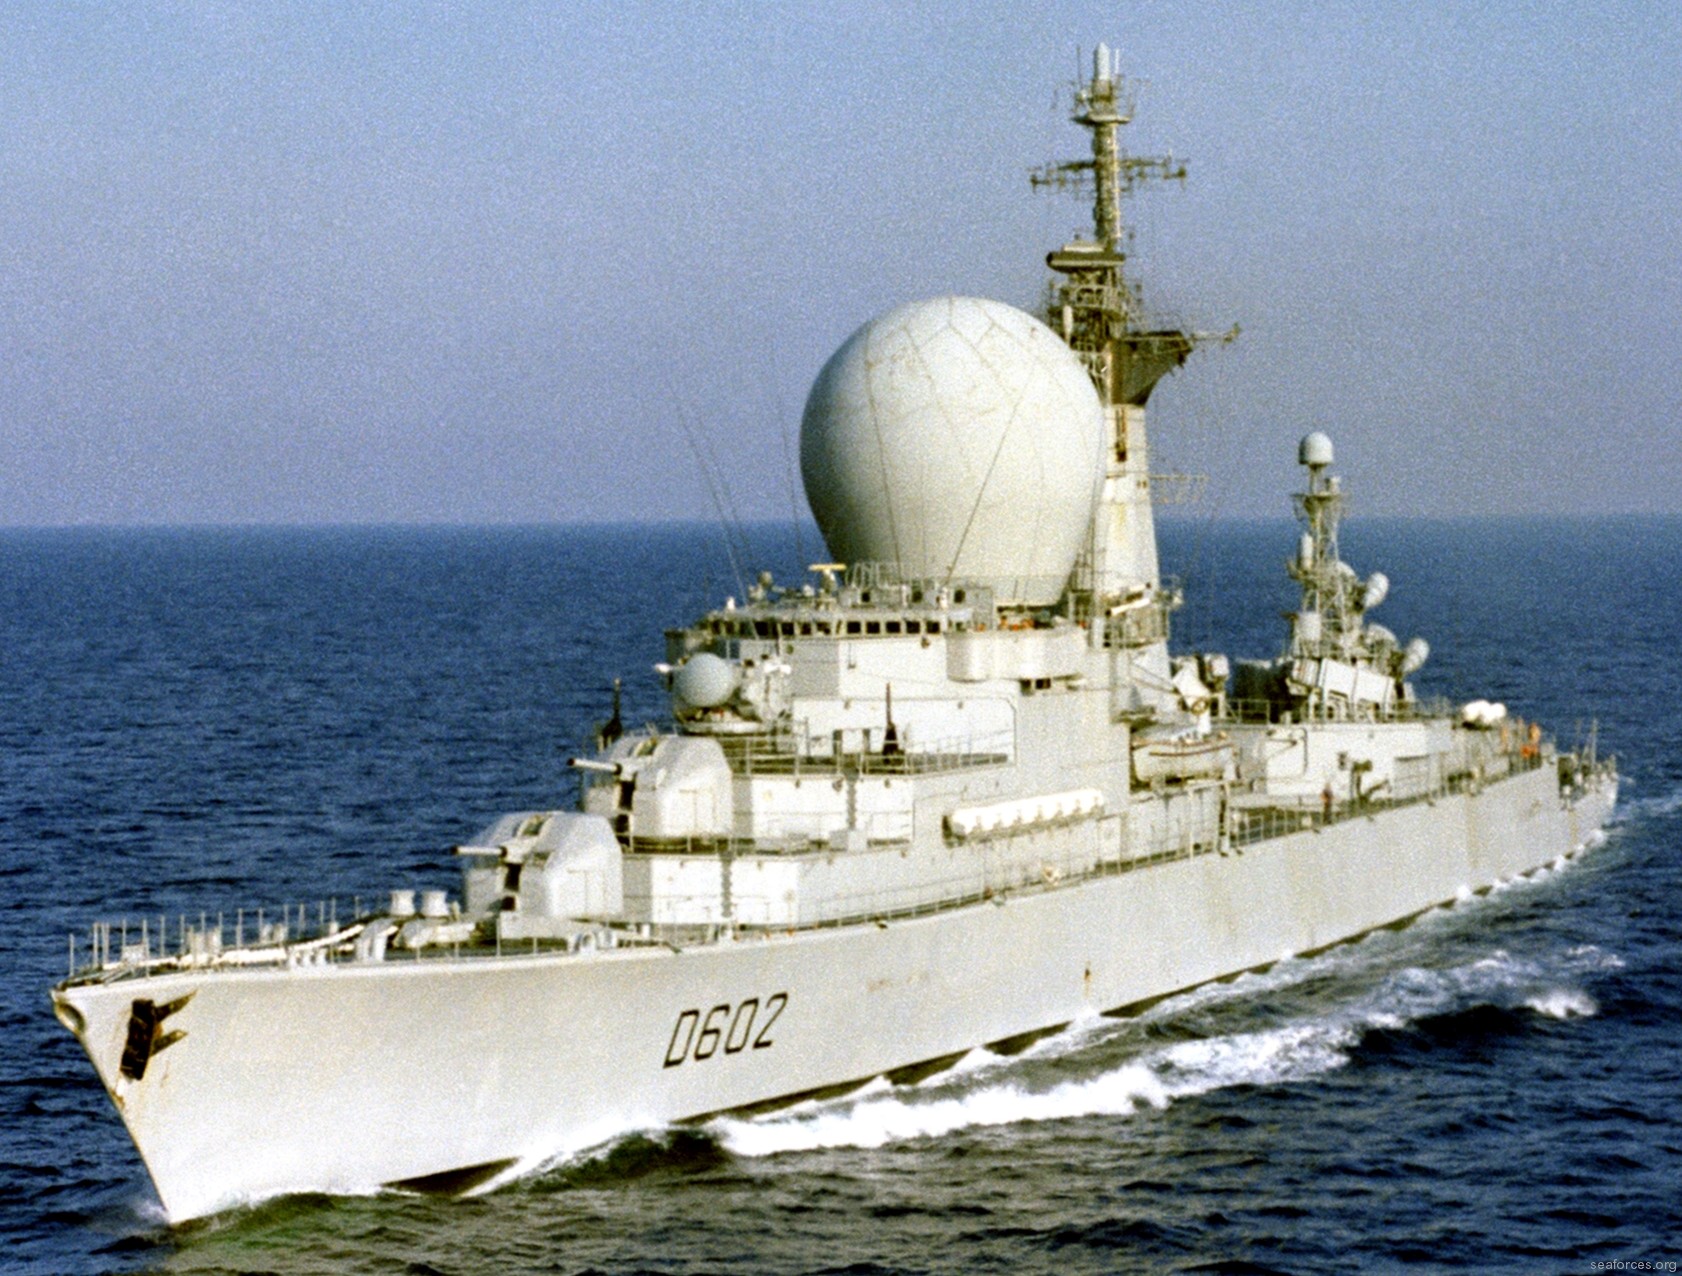 d-602 fs suffren class guided missile air defense frigate destroyer french navy marine nationale 02